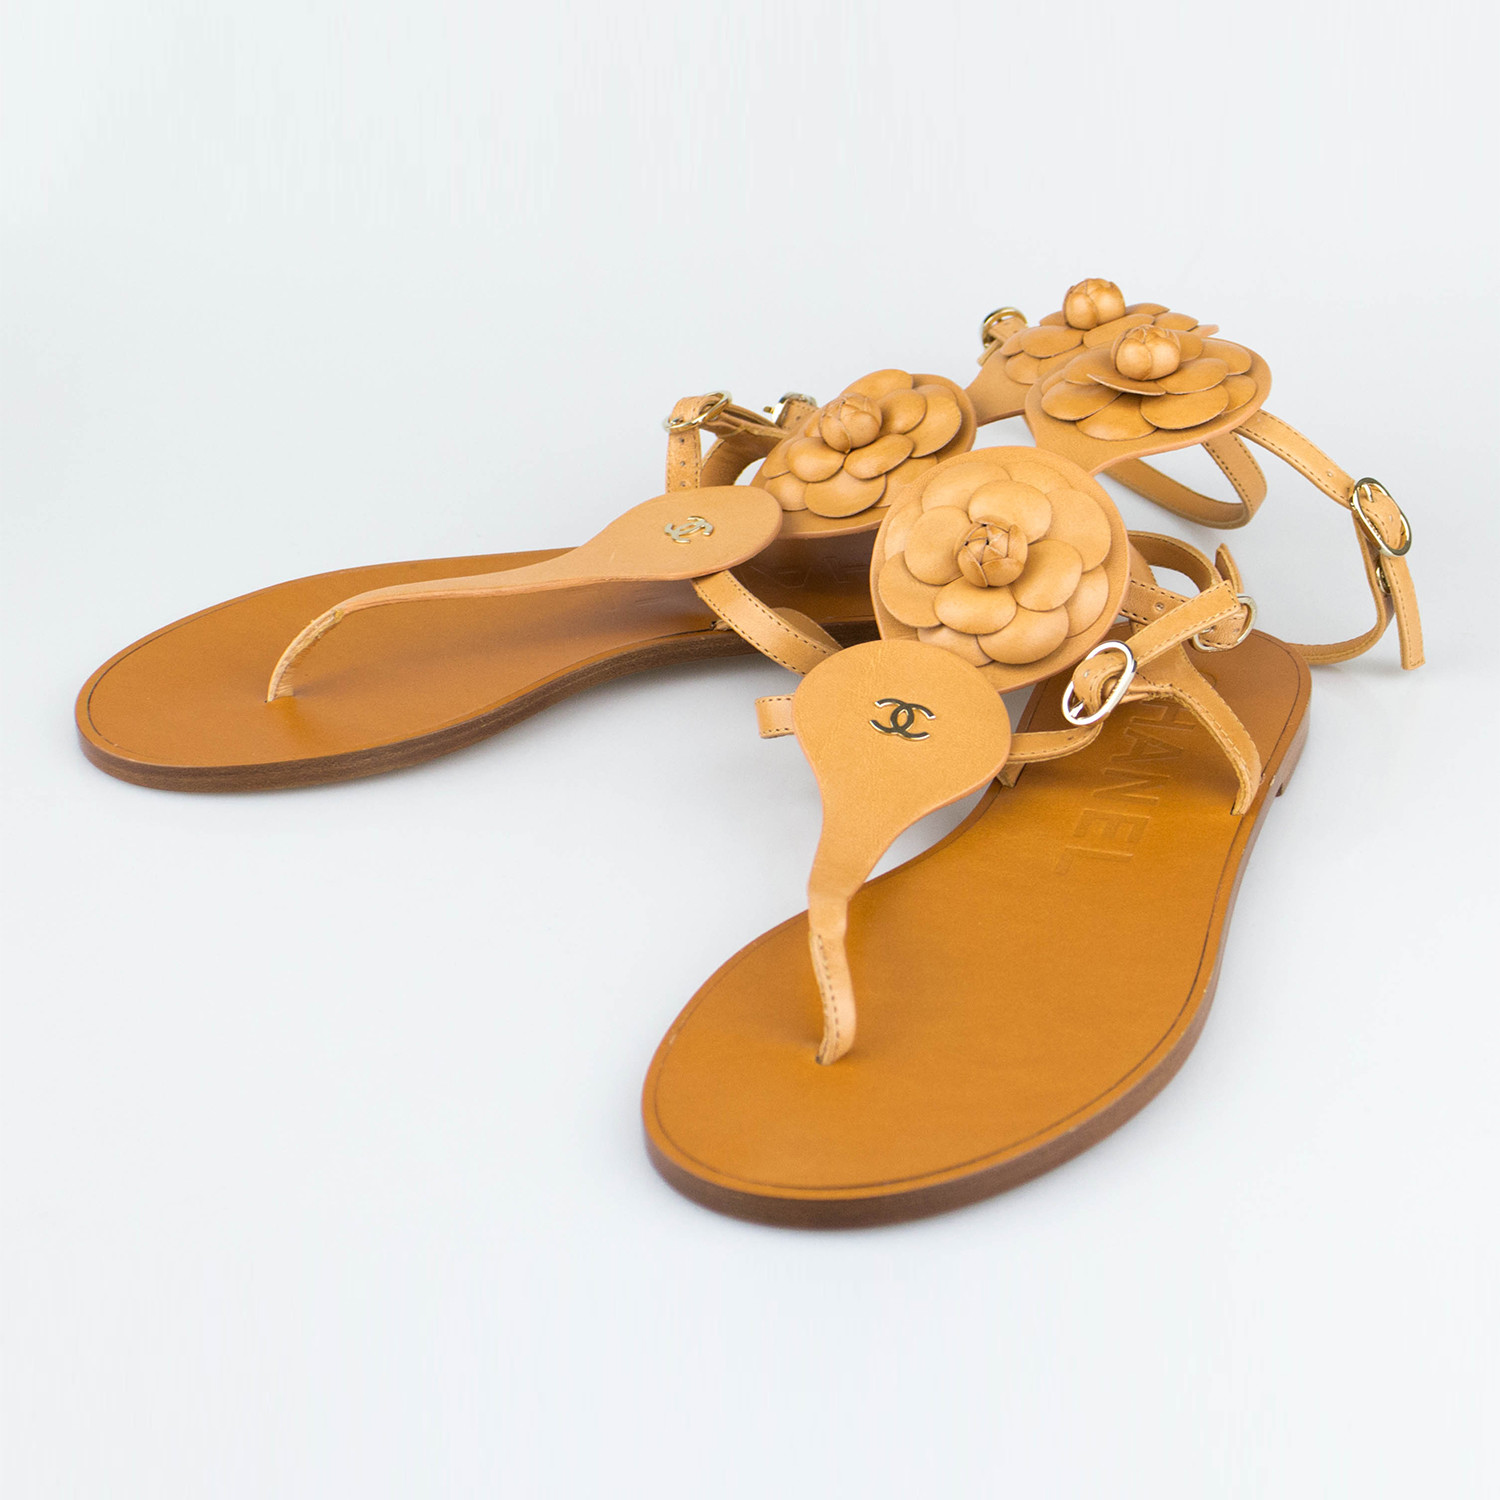 Chanel Calfskin Leather Camellia Flower Sandals Shoes // Beige (Euro